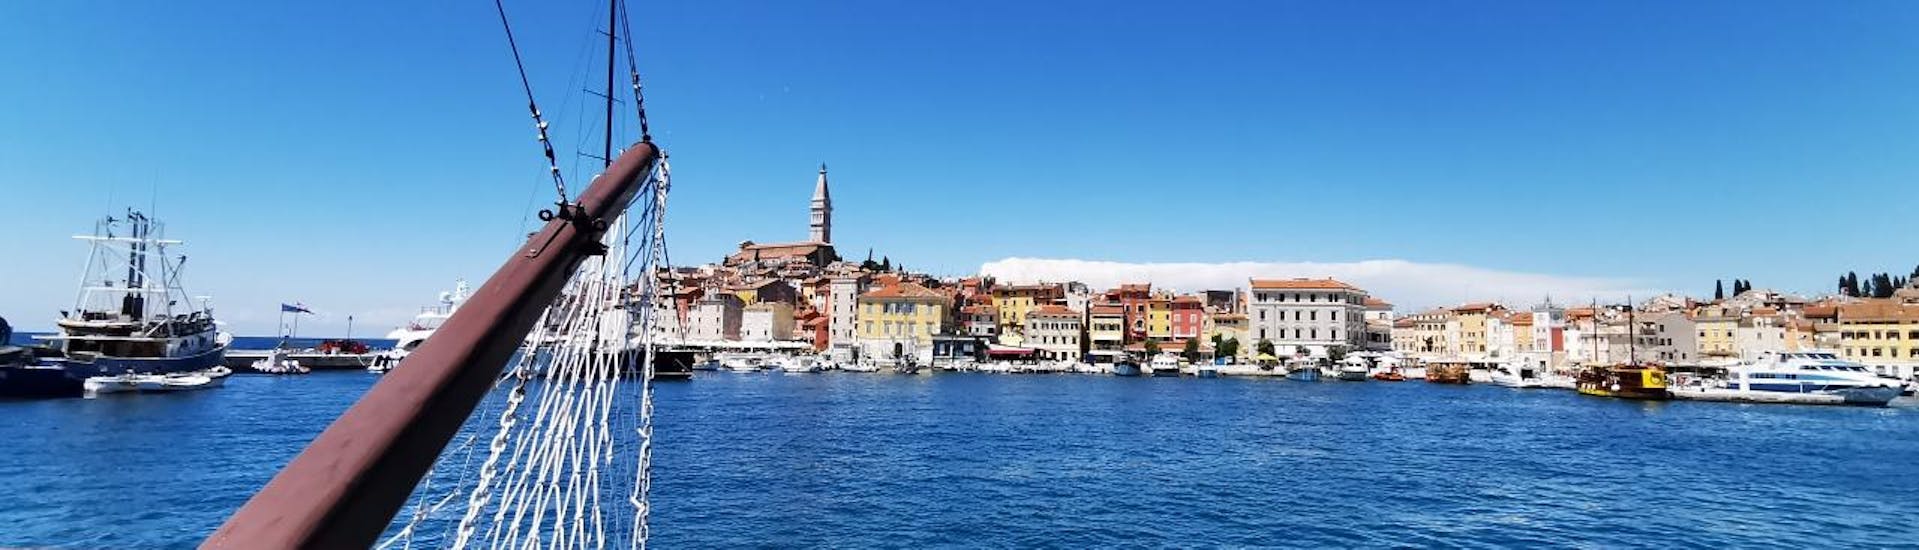 View from the ship during the boat Trip to Rovinj and Lim Fjord from Vrsar hosted by Santa Ana Vrsar.